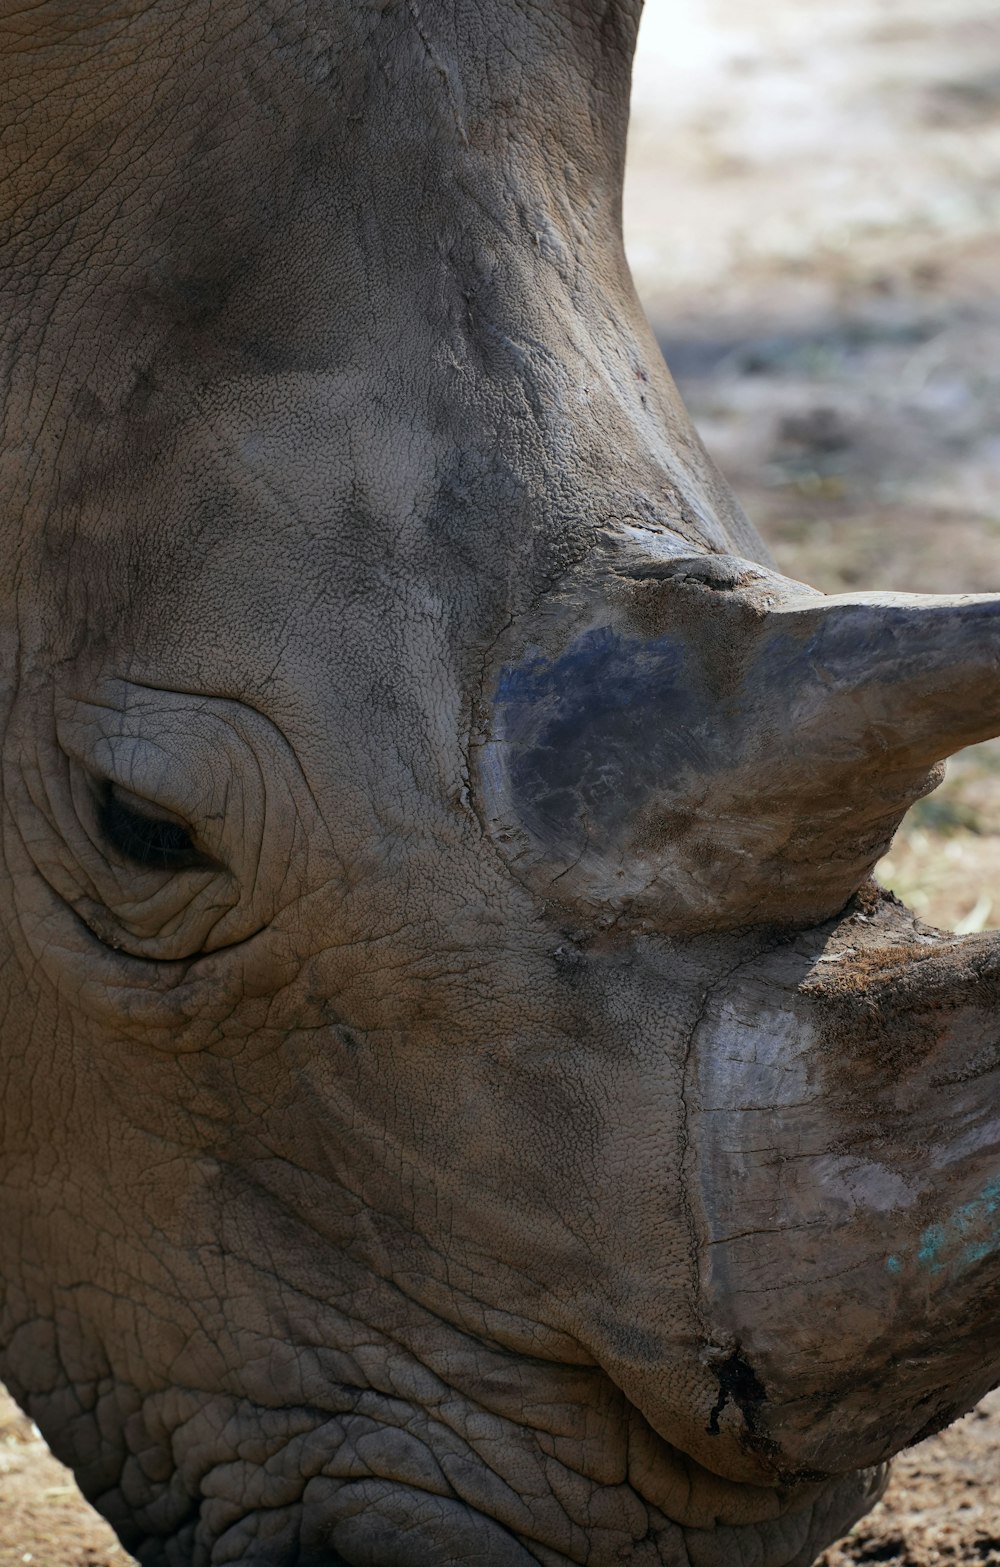 a close up of a rhino's face and nose